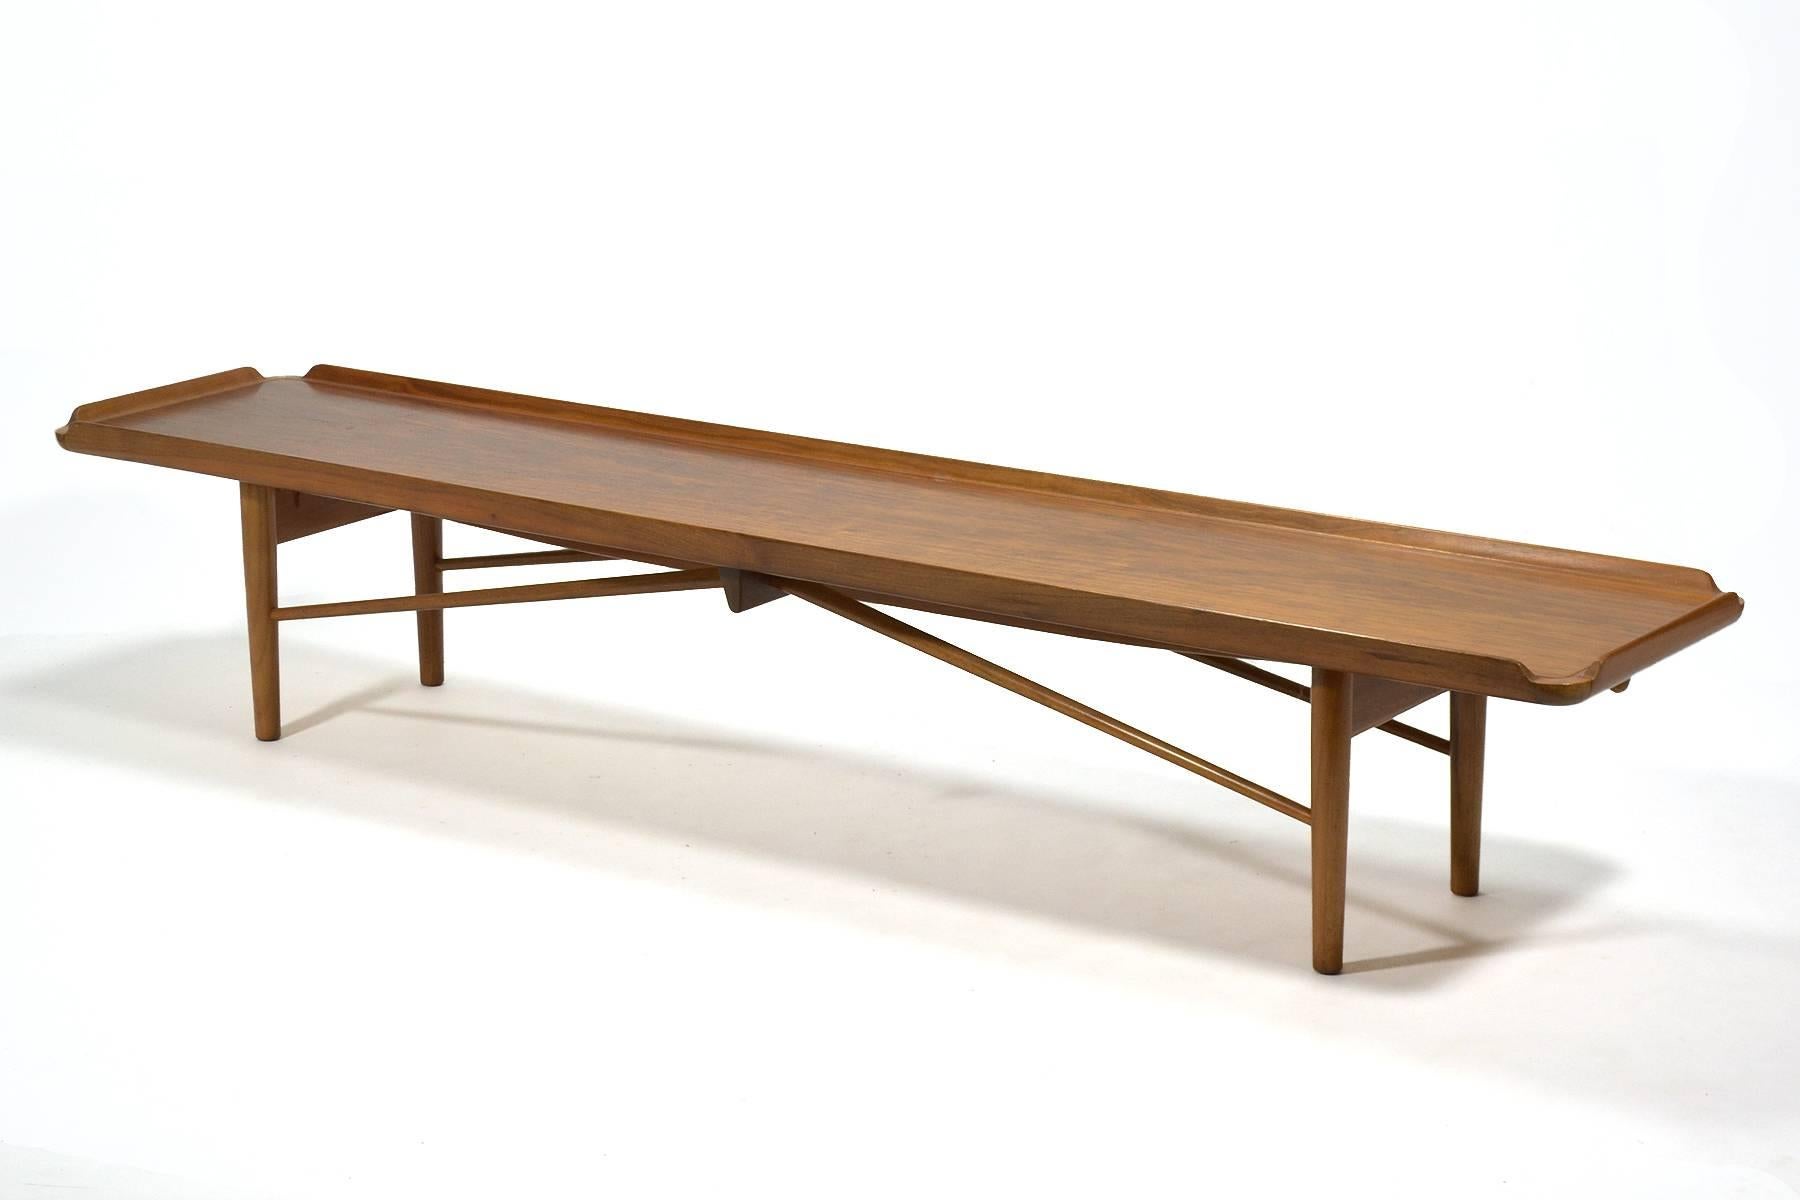 This bench by Finn Juhl was created to serve double duty. It is a long, elegant coffee table and with the addition of a seat cushion, a comfortable bench. Designed in 1951 for Baker furniture, it predates the more widely seen bench Juhl designed for